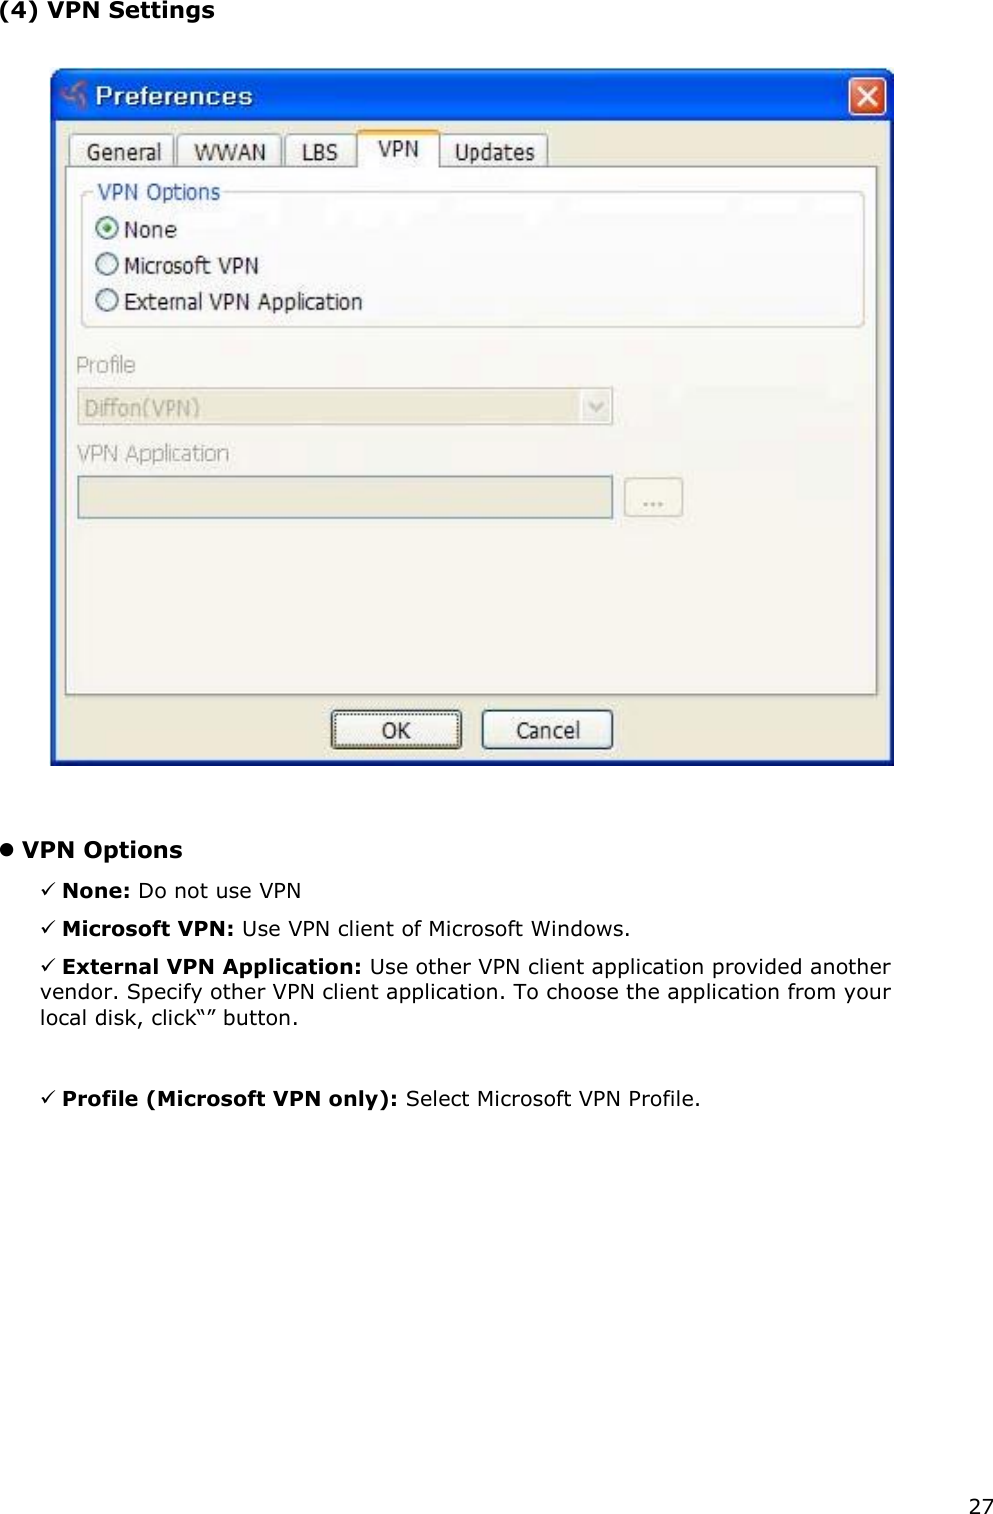 27   (4) VPN Settings       VPN Options     None: Do not use VPN     Microsoft VPN: Use VPN client of Microsoft Windows.     External VPN Application: Use other VPN client application provided another vendor. Specify other VPN client application. To choose the application from your local disk, click“” button.     Profile (Microsoft VPN only): Select Microsoft VPN Profile.                          